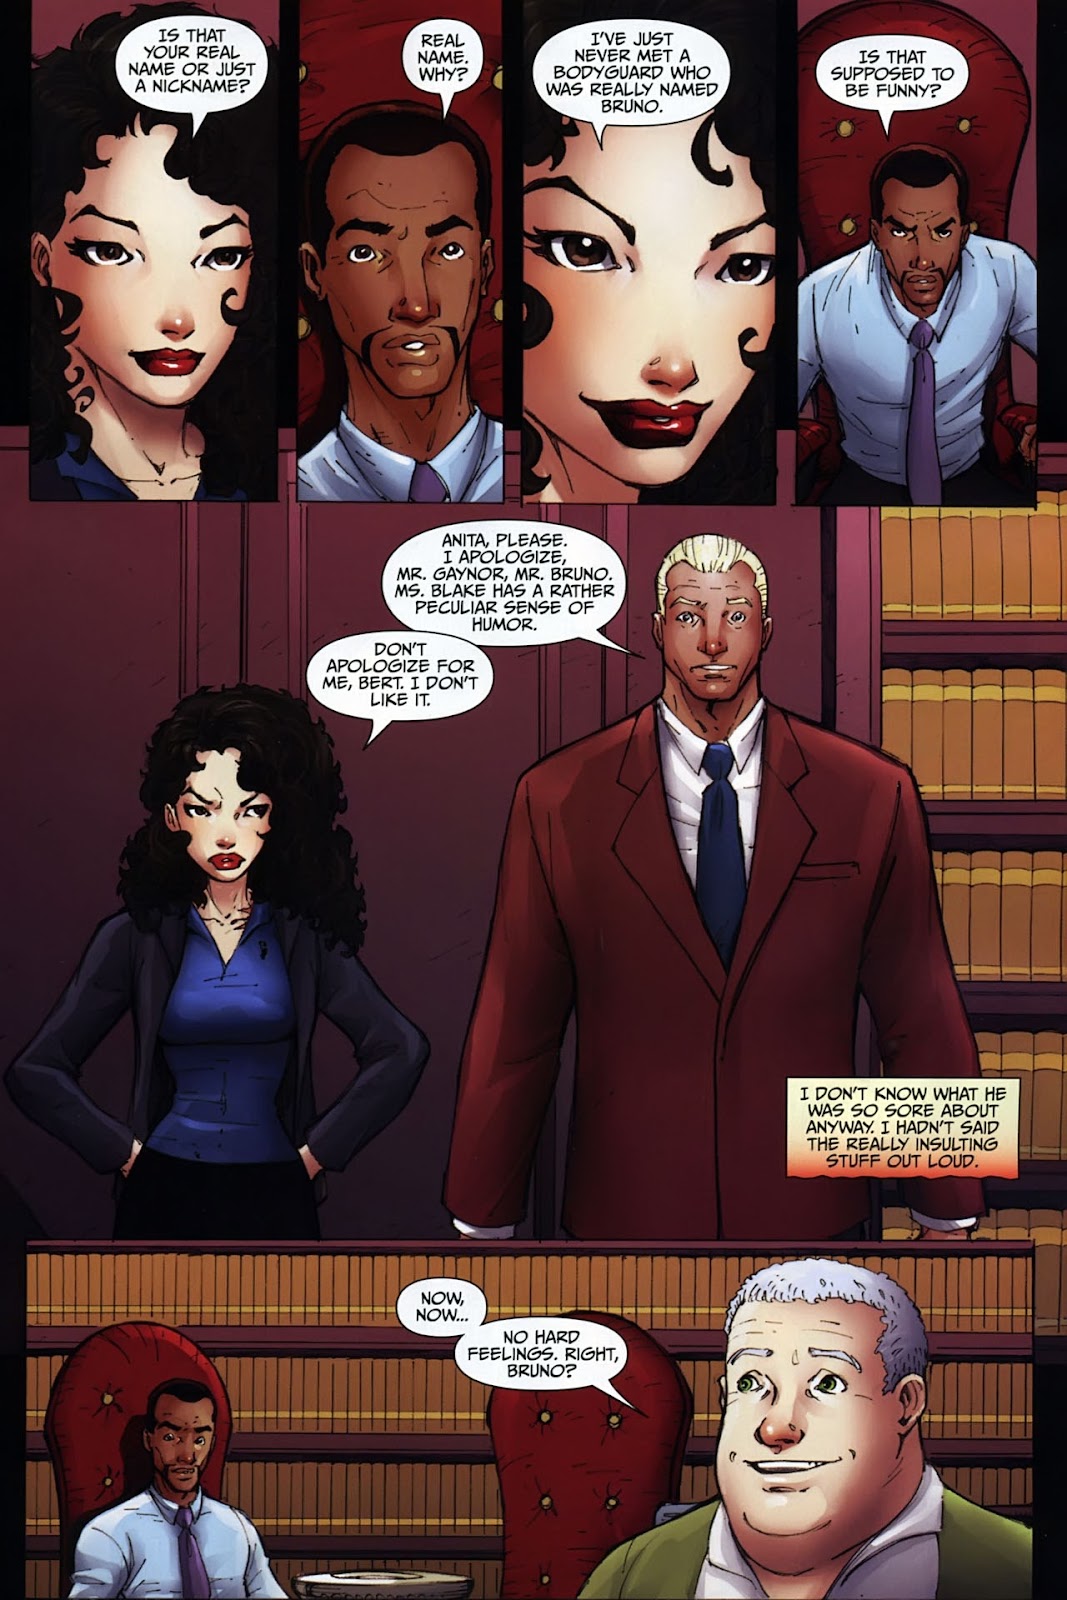 Anita Blake: The Laughing Corpse - Book One issue 1 - Page 6